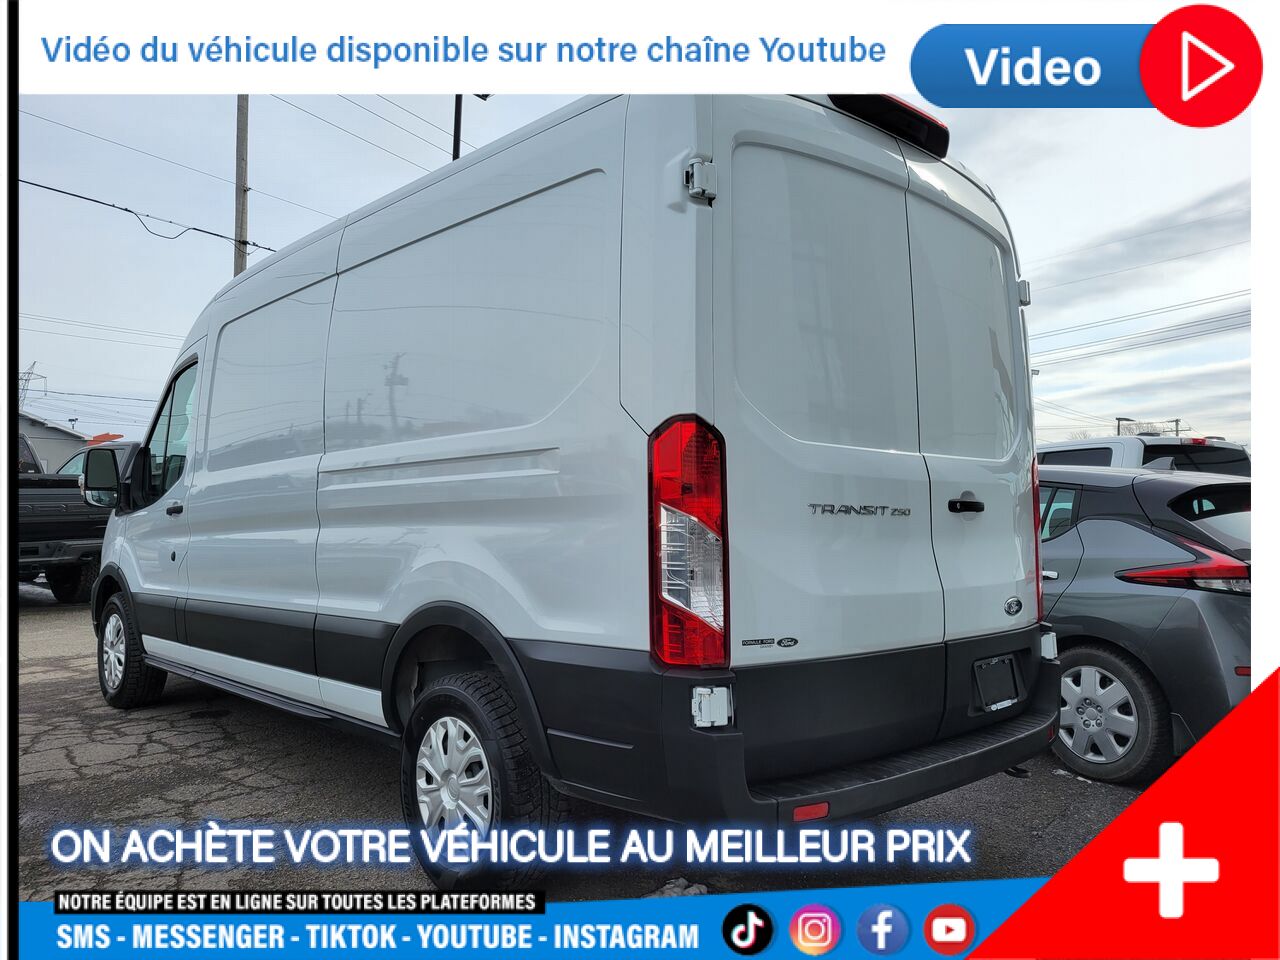 2021 Ford Transit fourgon utilitaire Granby - photo #4